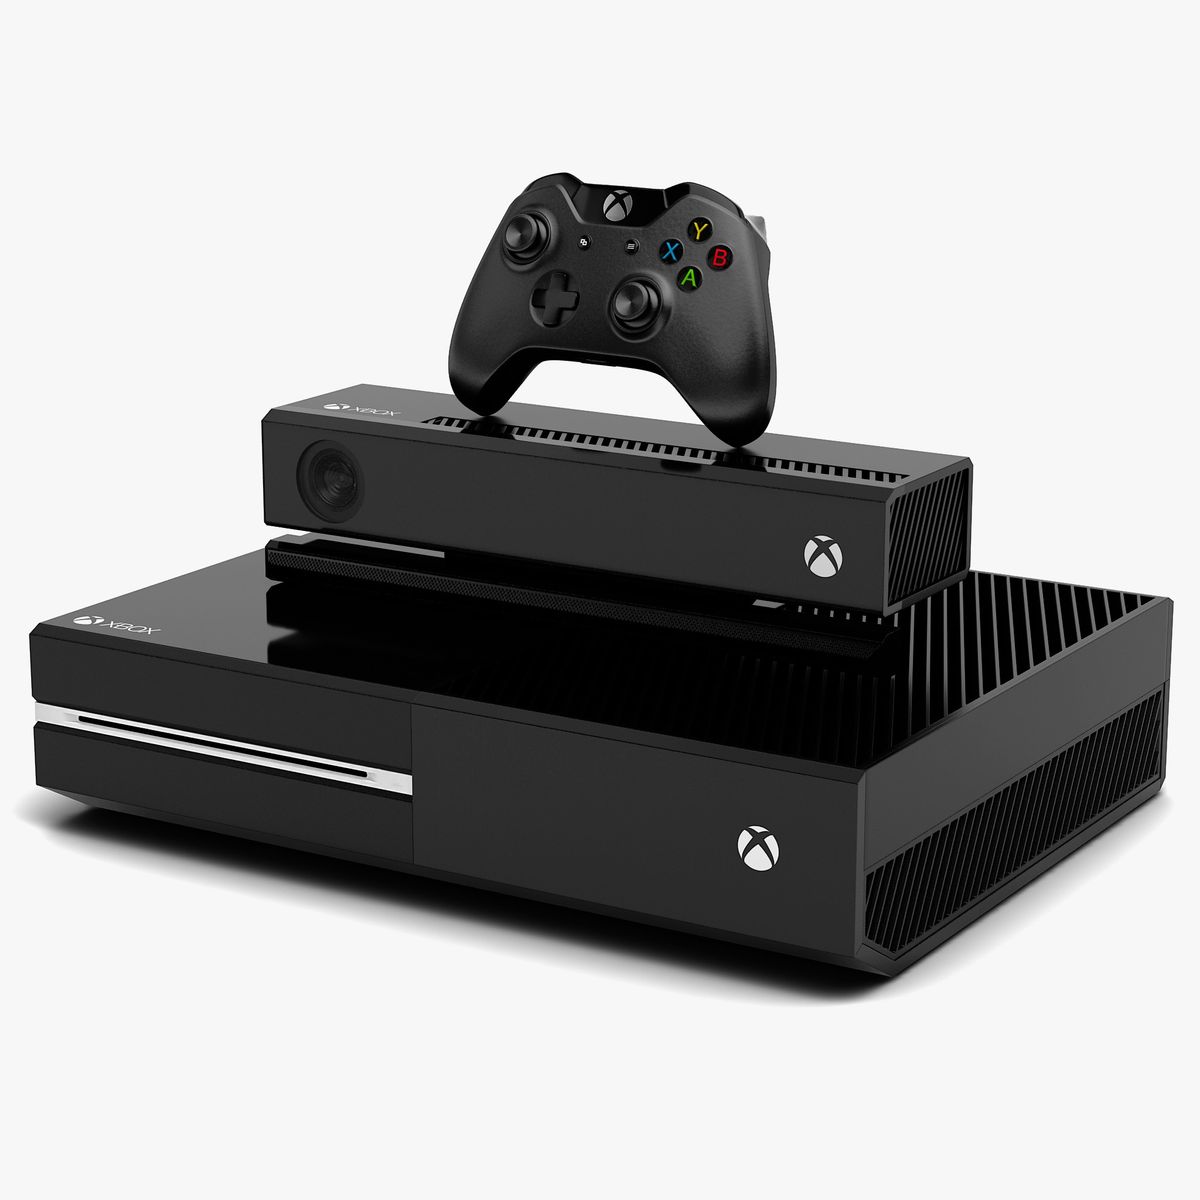 Microsoft Xbox One Review: Everything You Need to Know | Tom's Guide